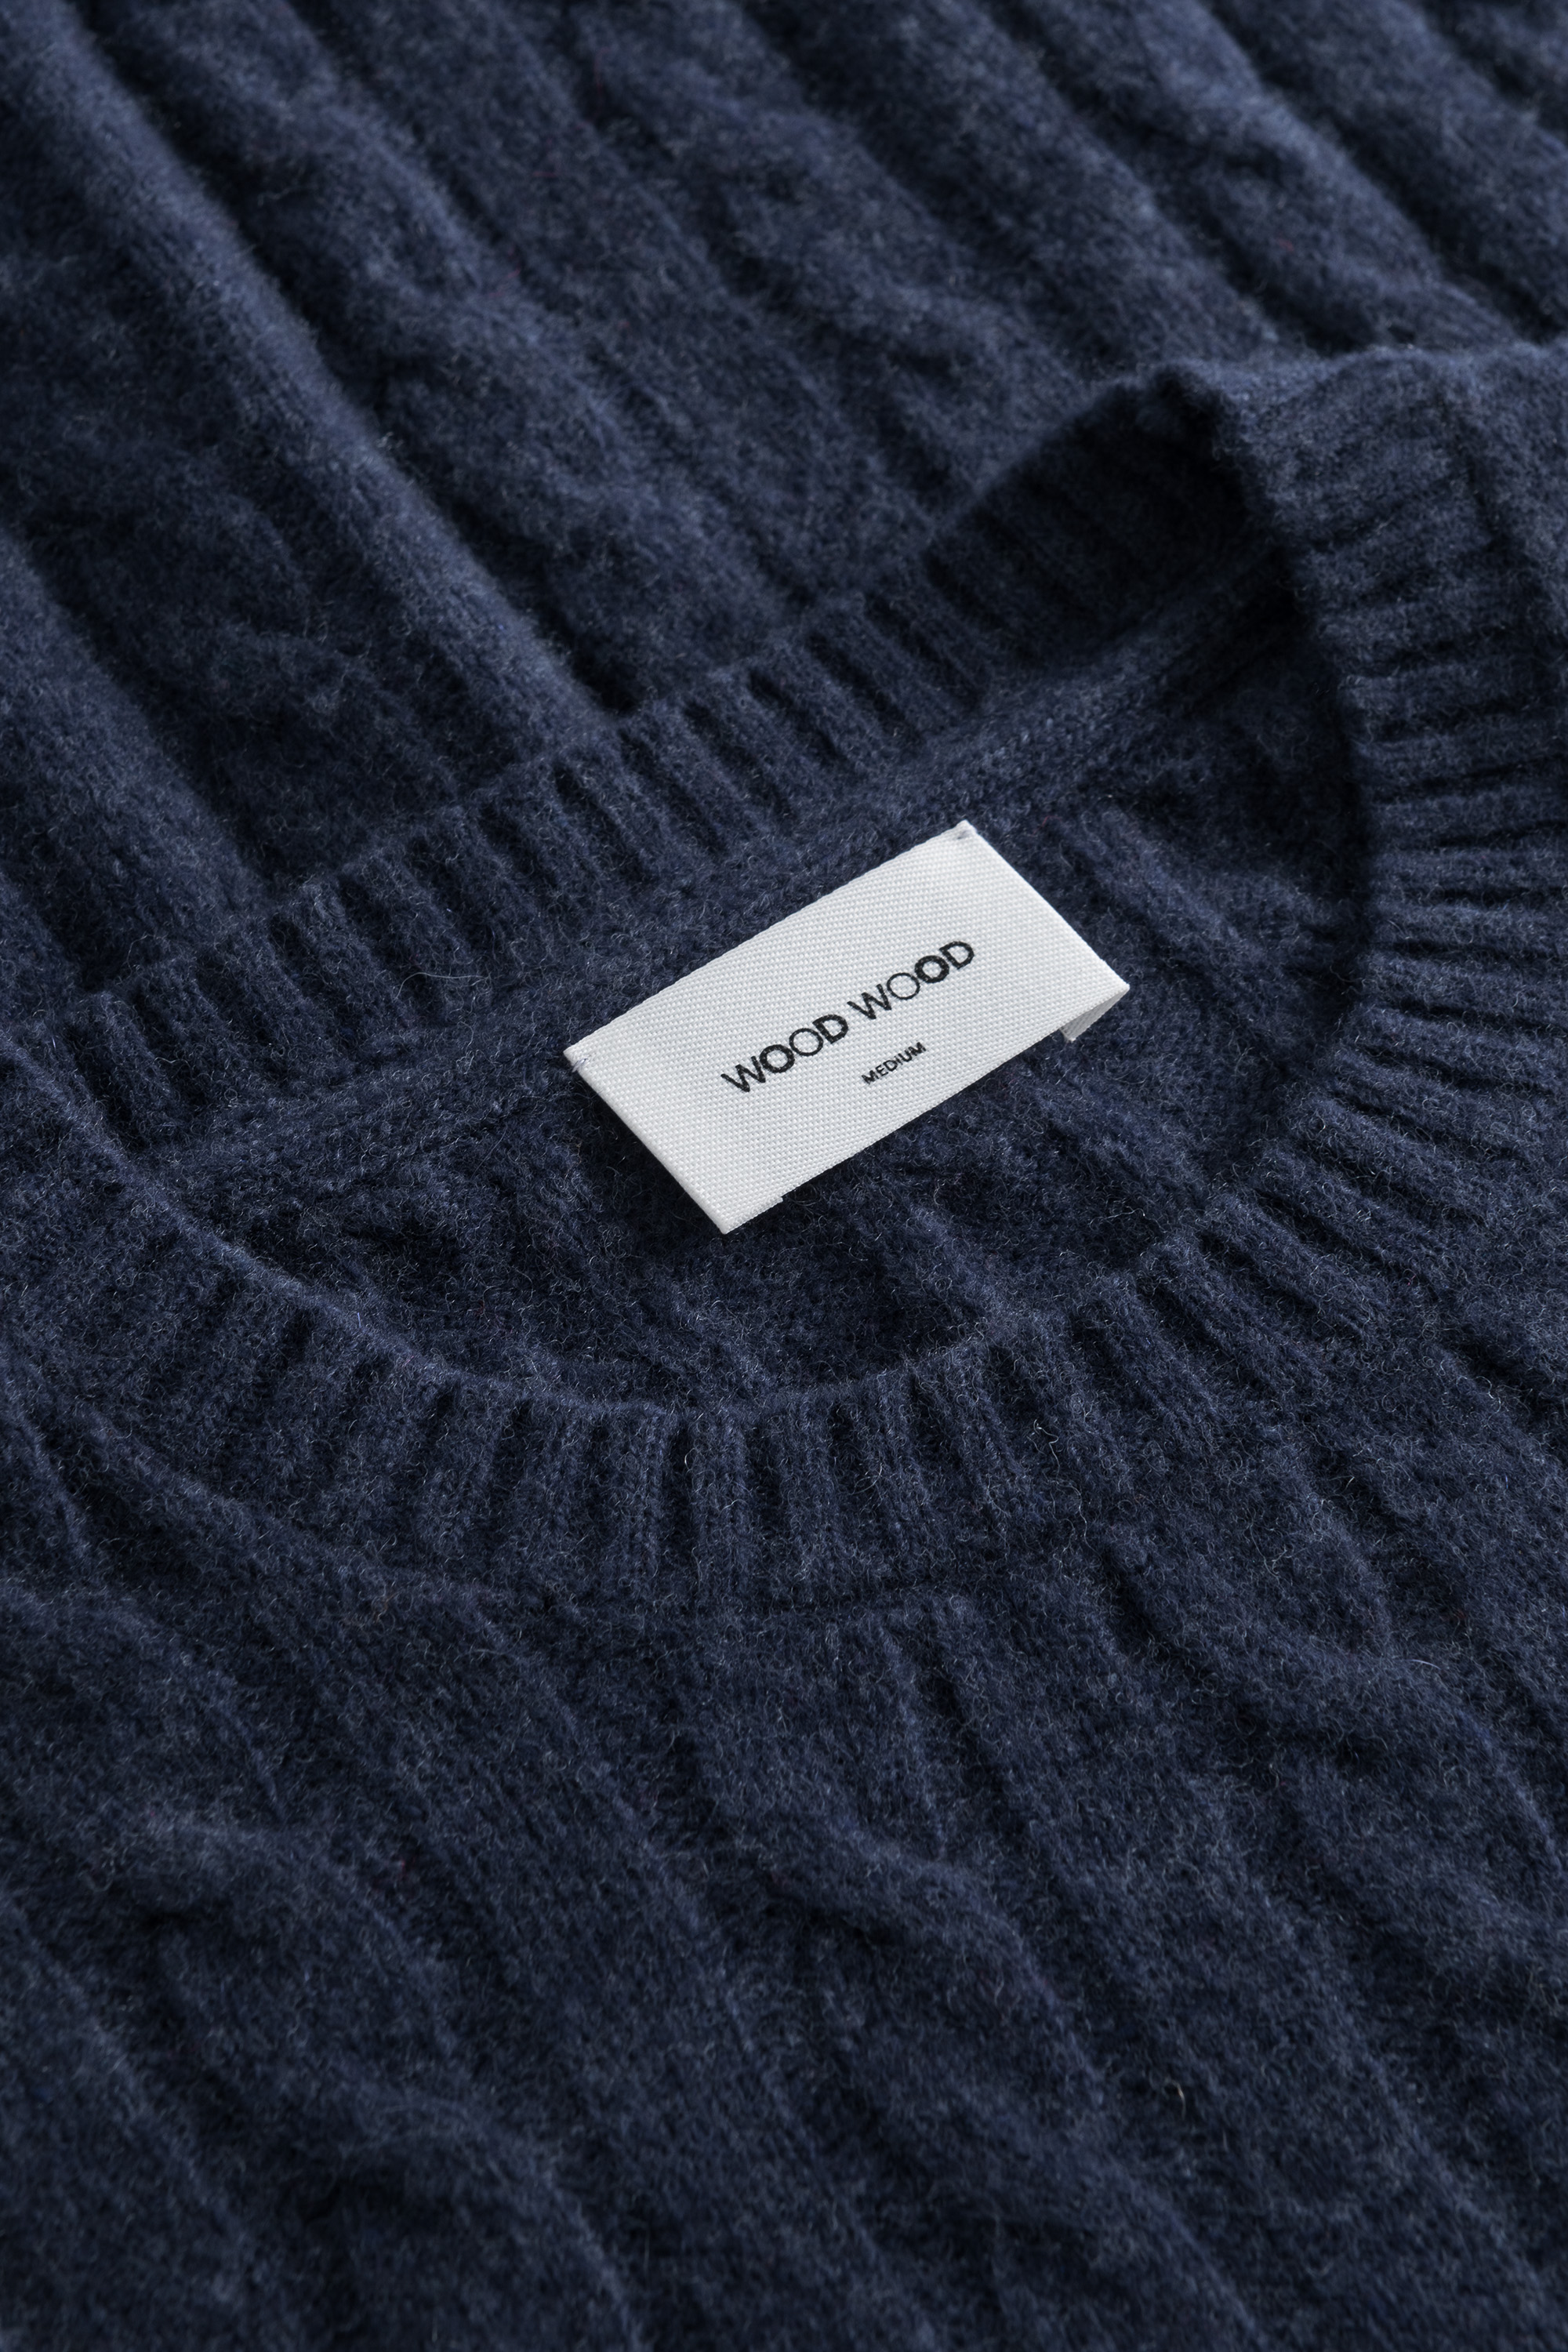 Wood Wood Beckett lambswool cable jumper Dusty blue | WoodWood.com